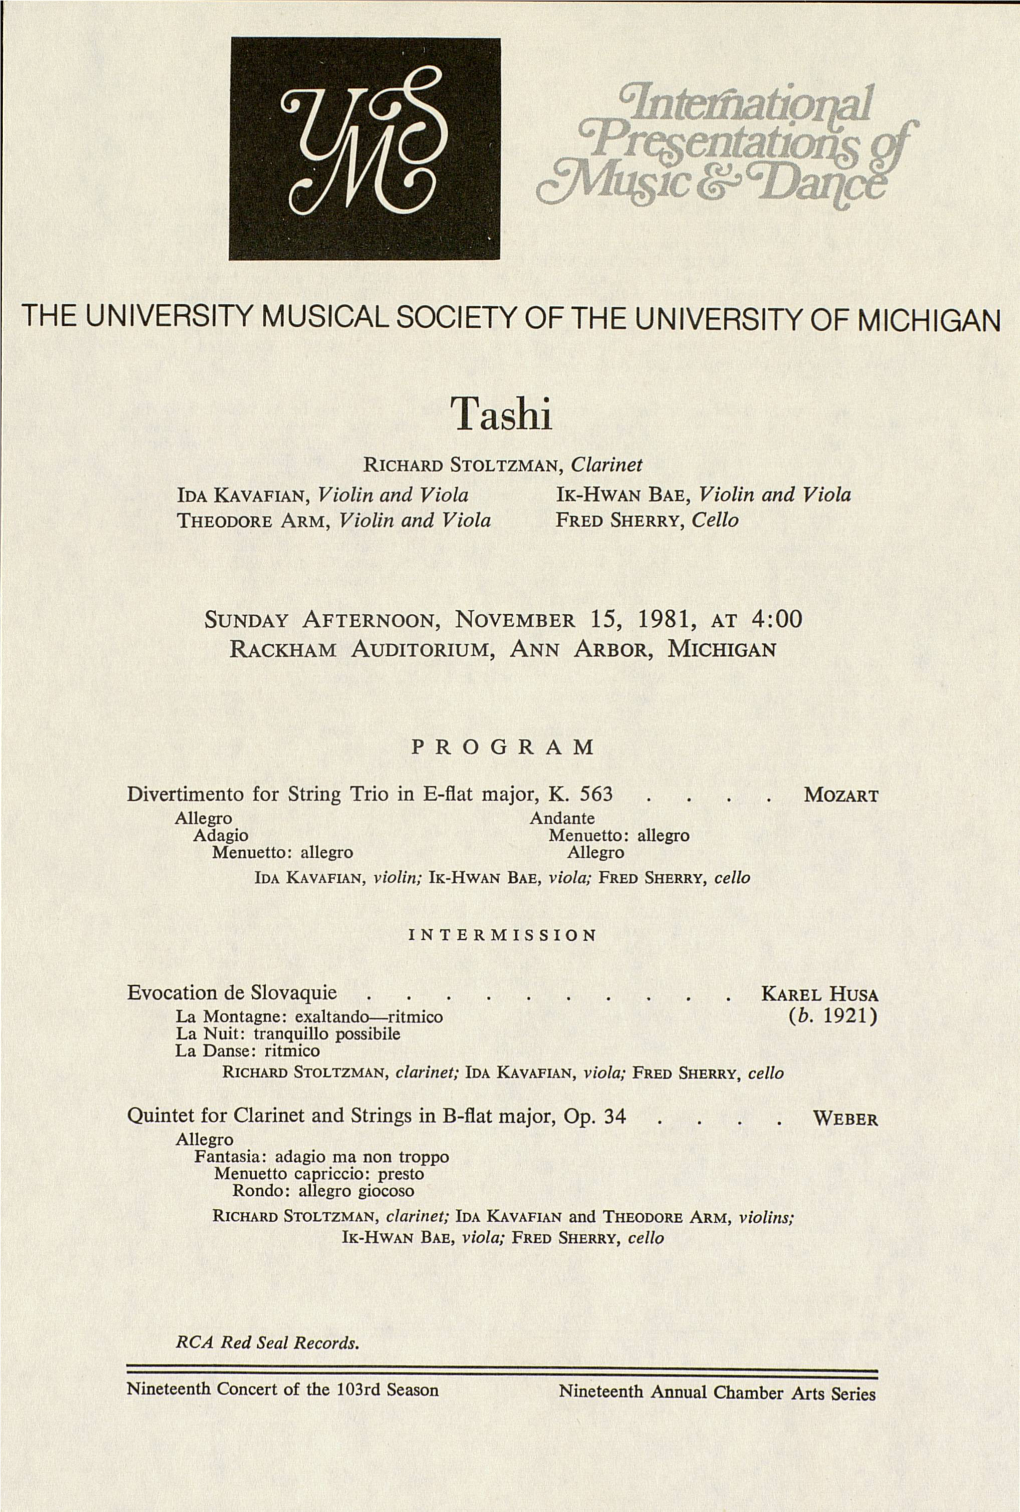 The University Musical Society of the University of Michigan